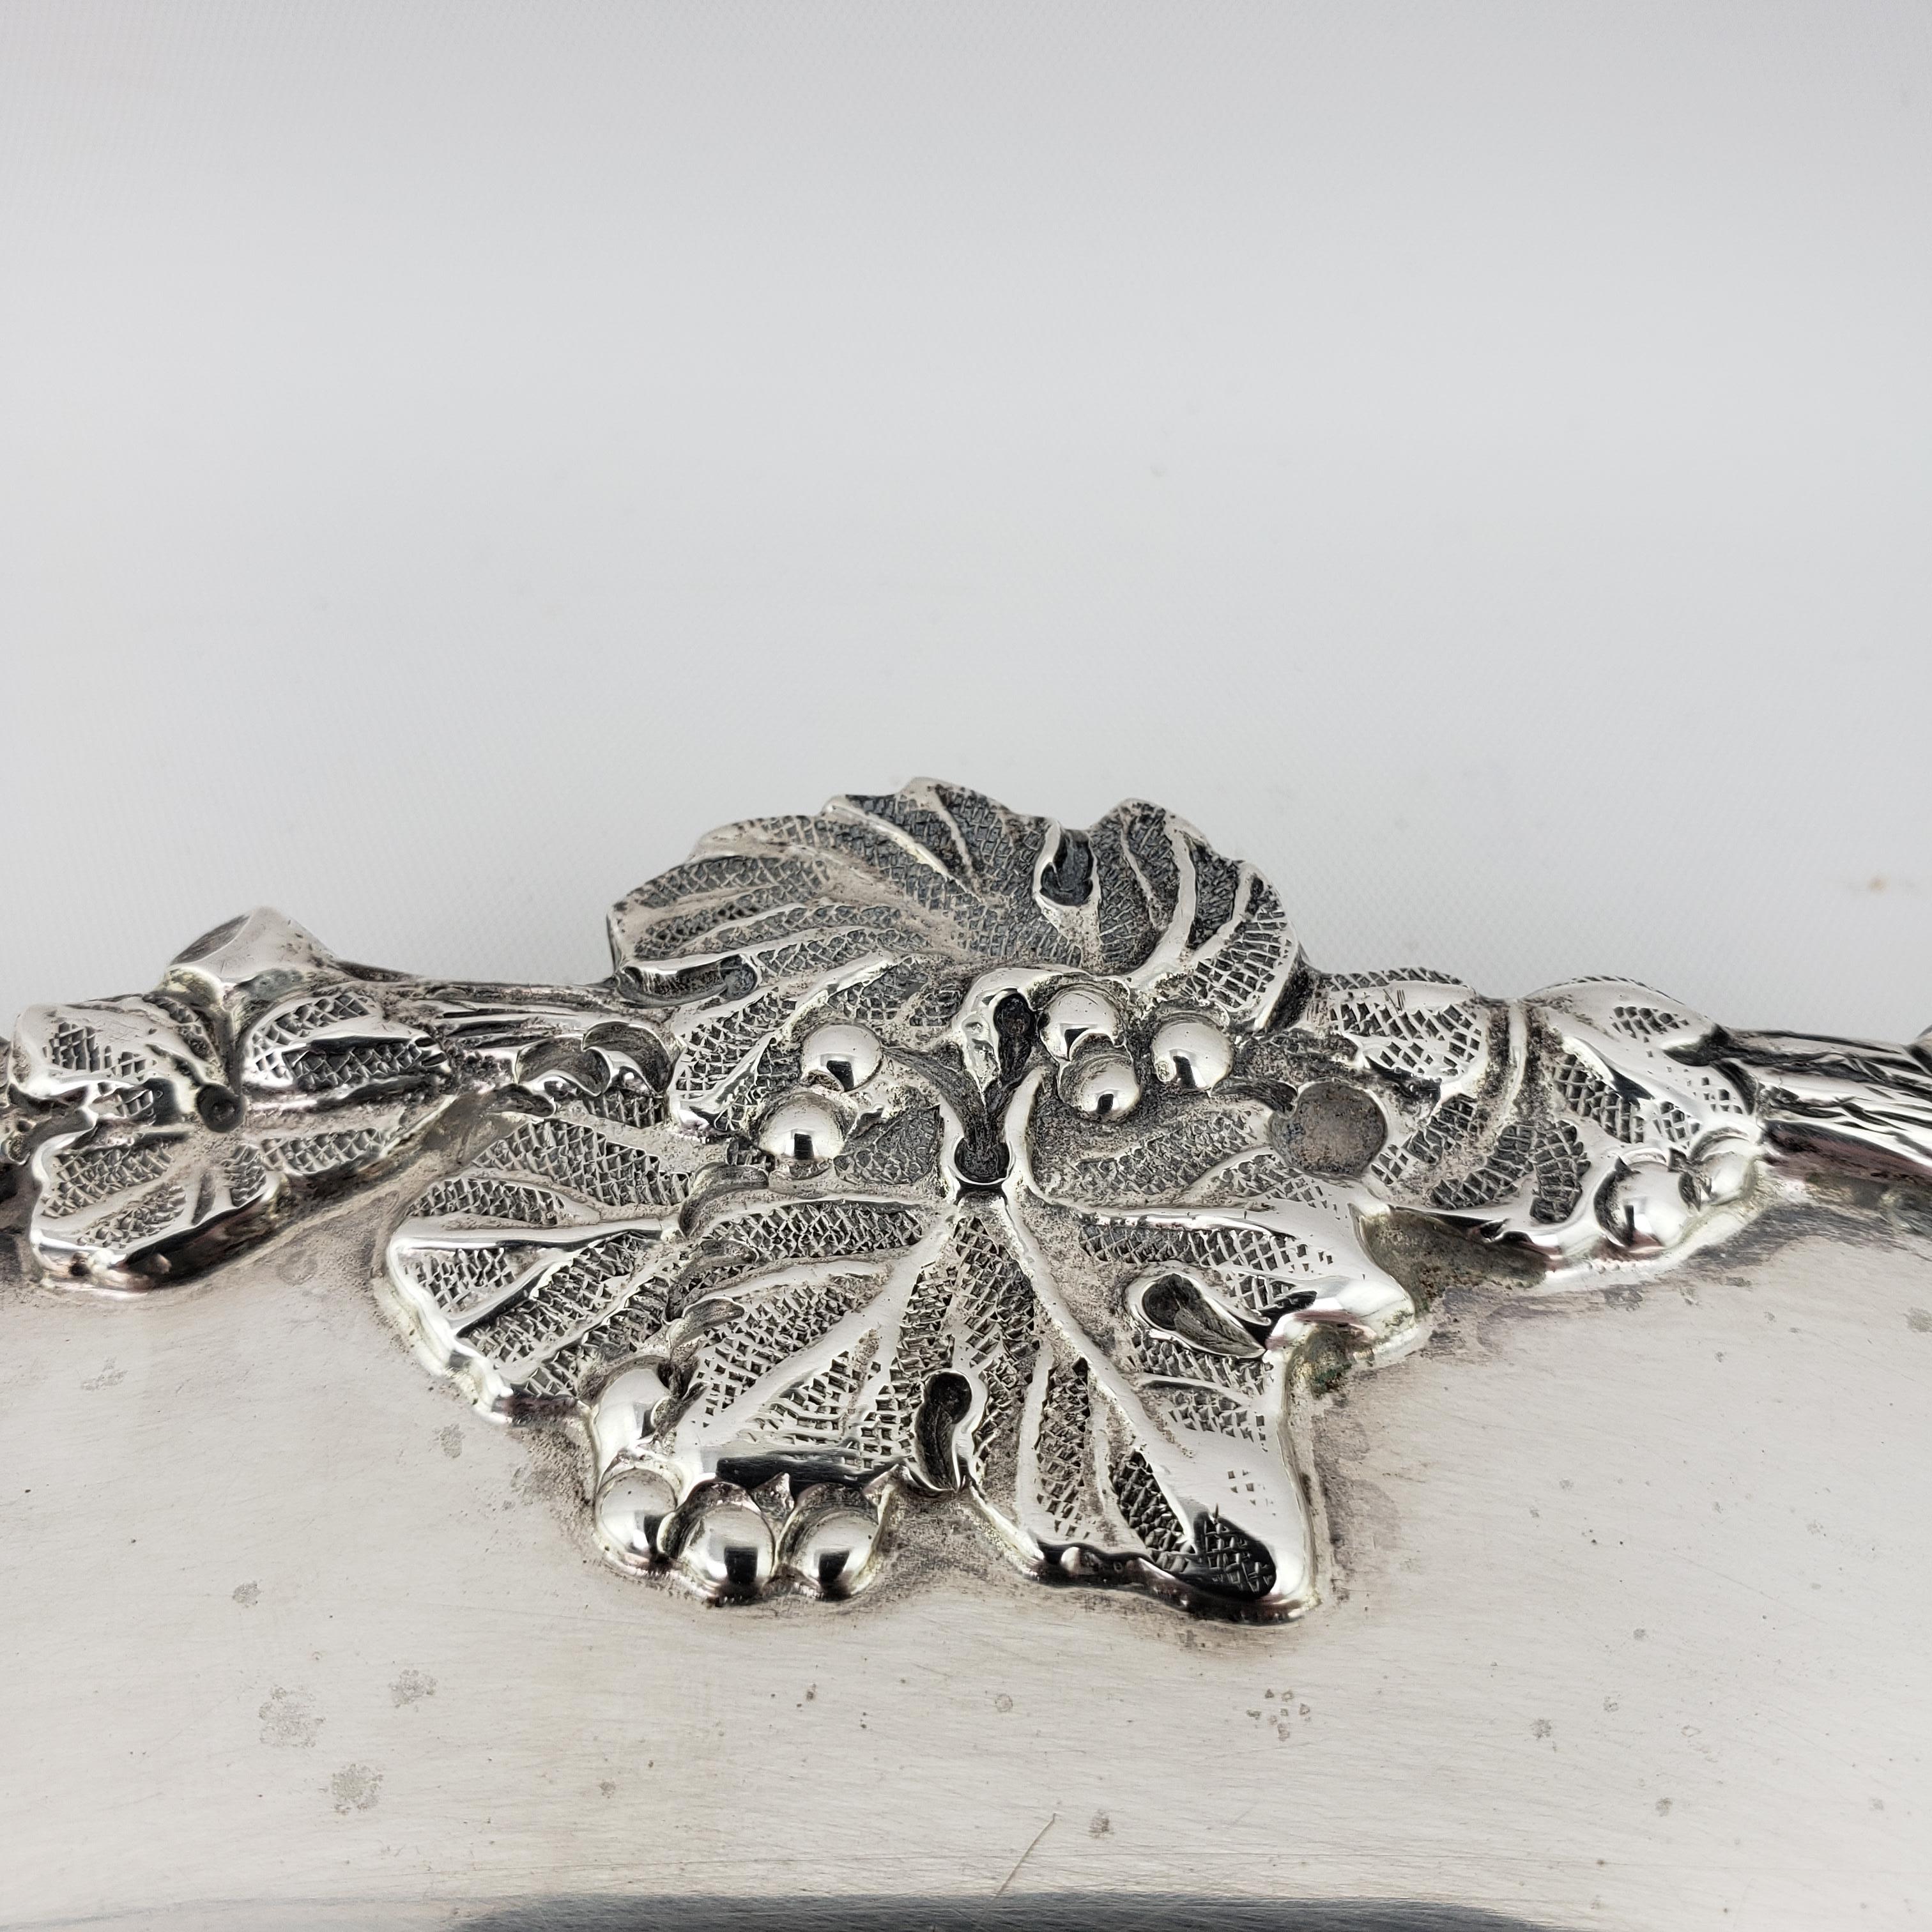 Round sterling silver serving tray featuring a raised border with a decorative grapevine motif. Weight: 1382 grams.